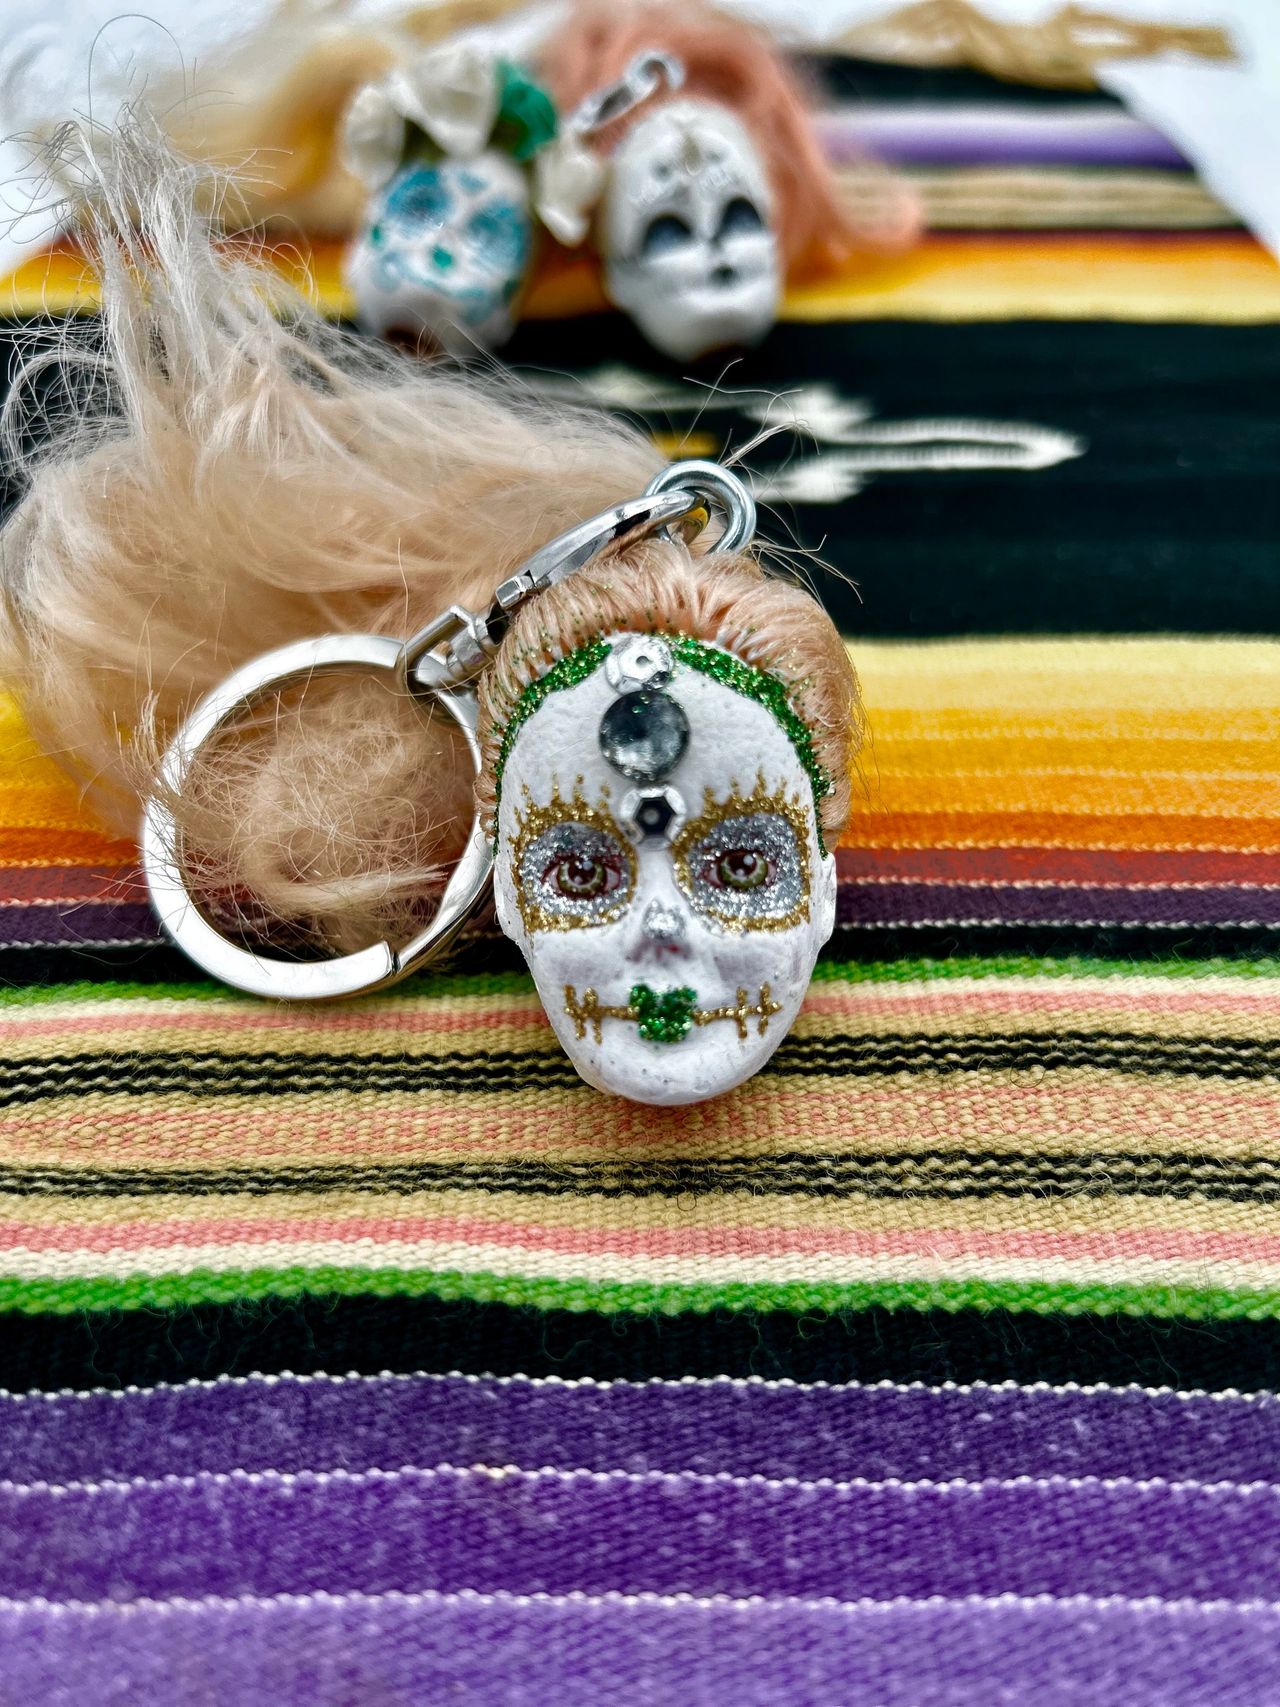 Decorated Barbie head key chain on Mexican blanket with 2 Barbie heads in the background.